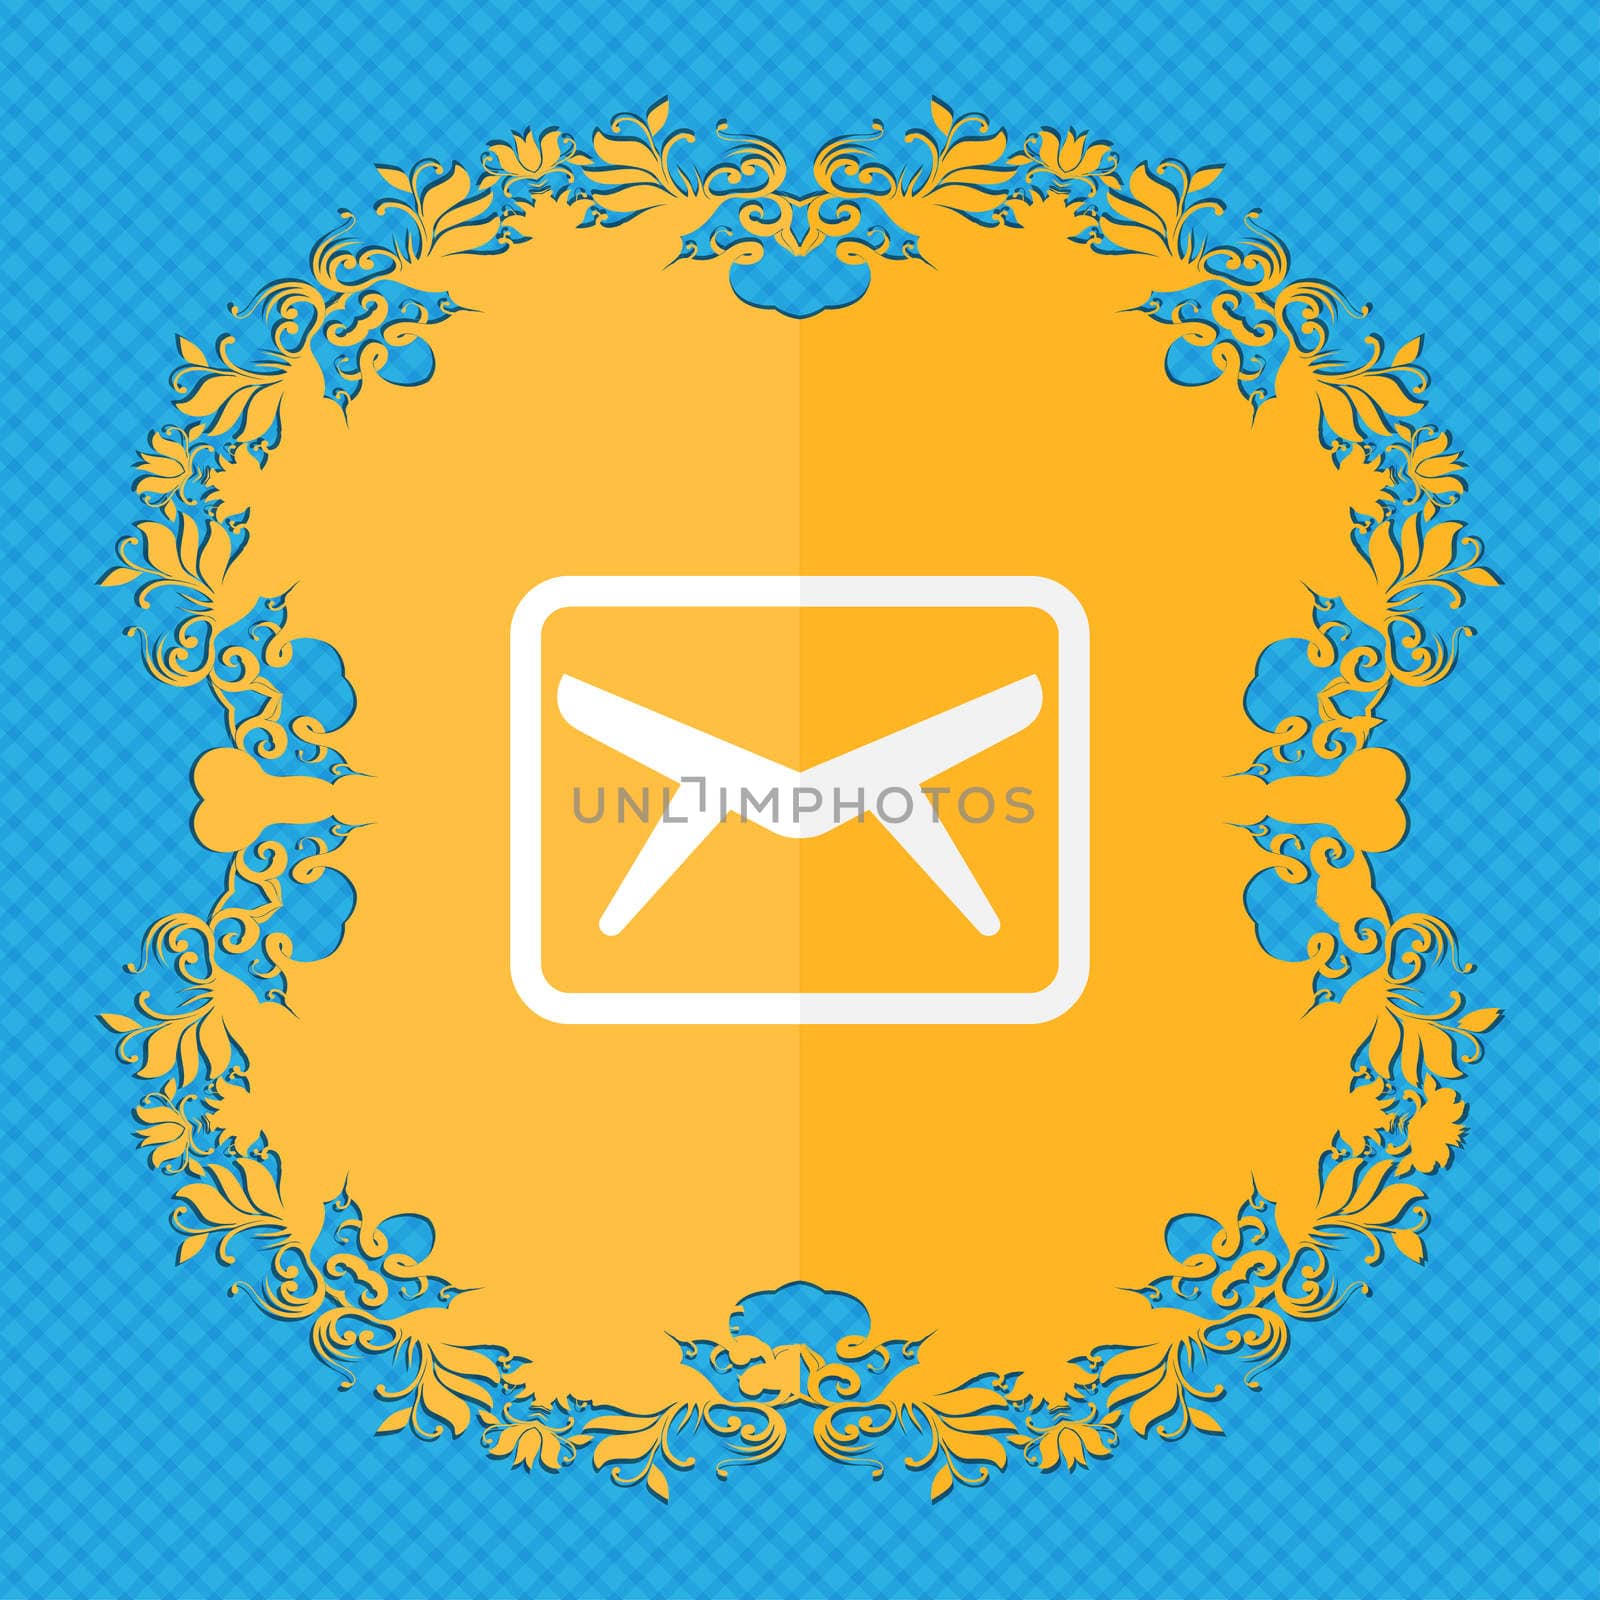 Mail, Envelope, Message. Floral flat design on a blue abstract background with place for your text. illustration